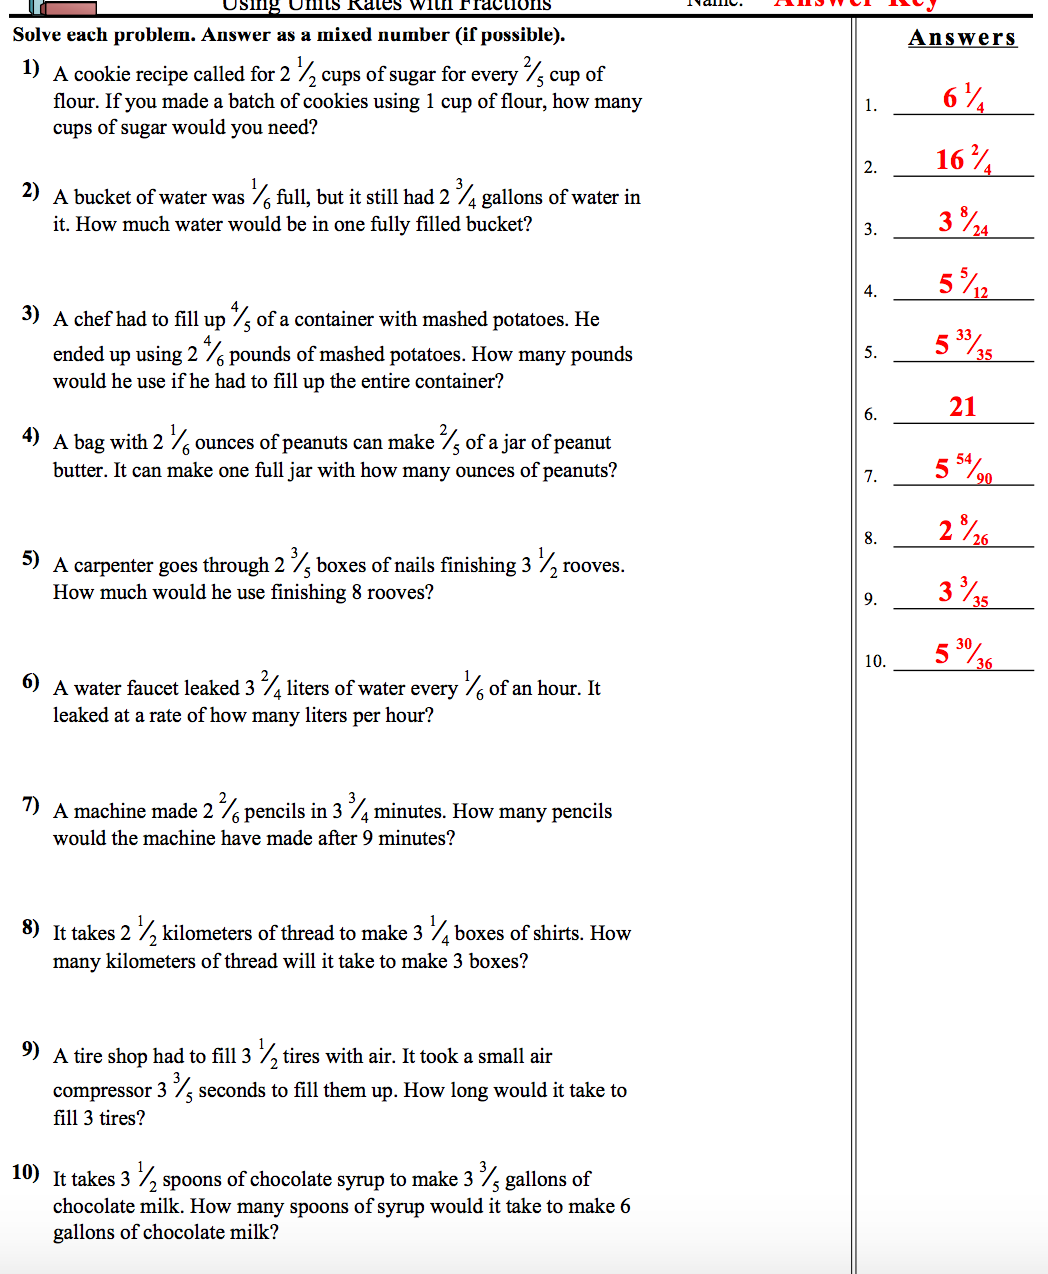 unit-rates-with-fractions-worksheet-answers-nms-self-paced-math-math-worksheet-answers